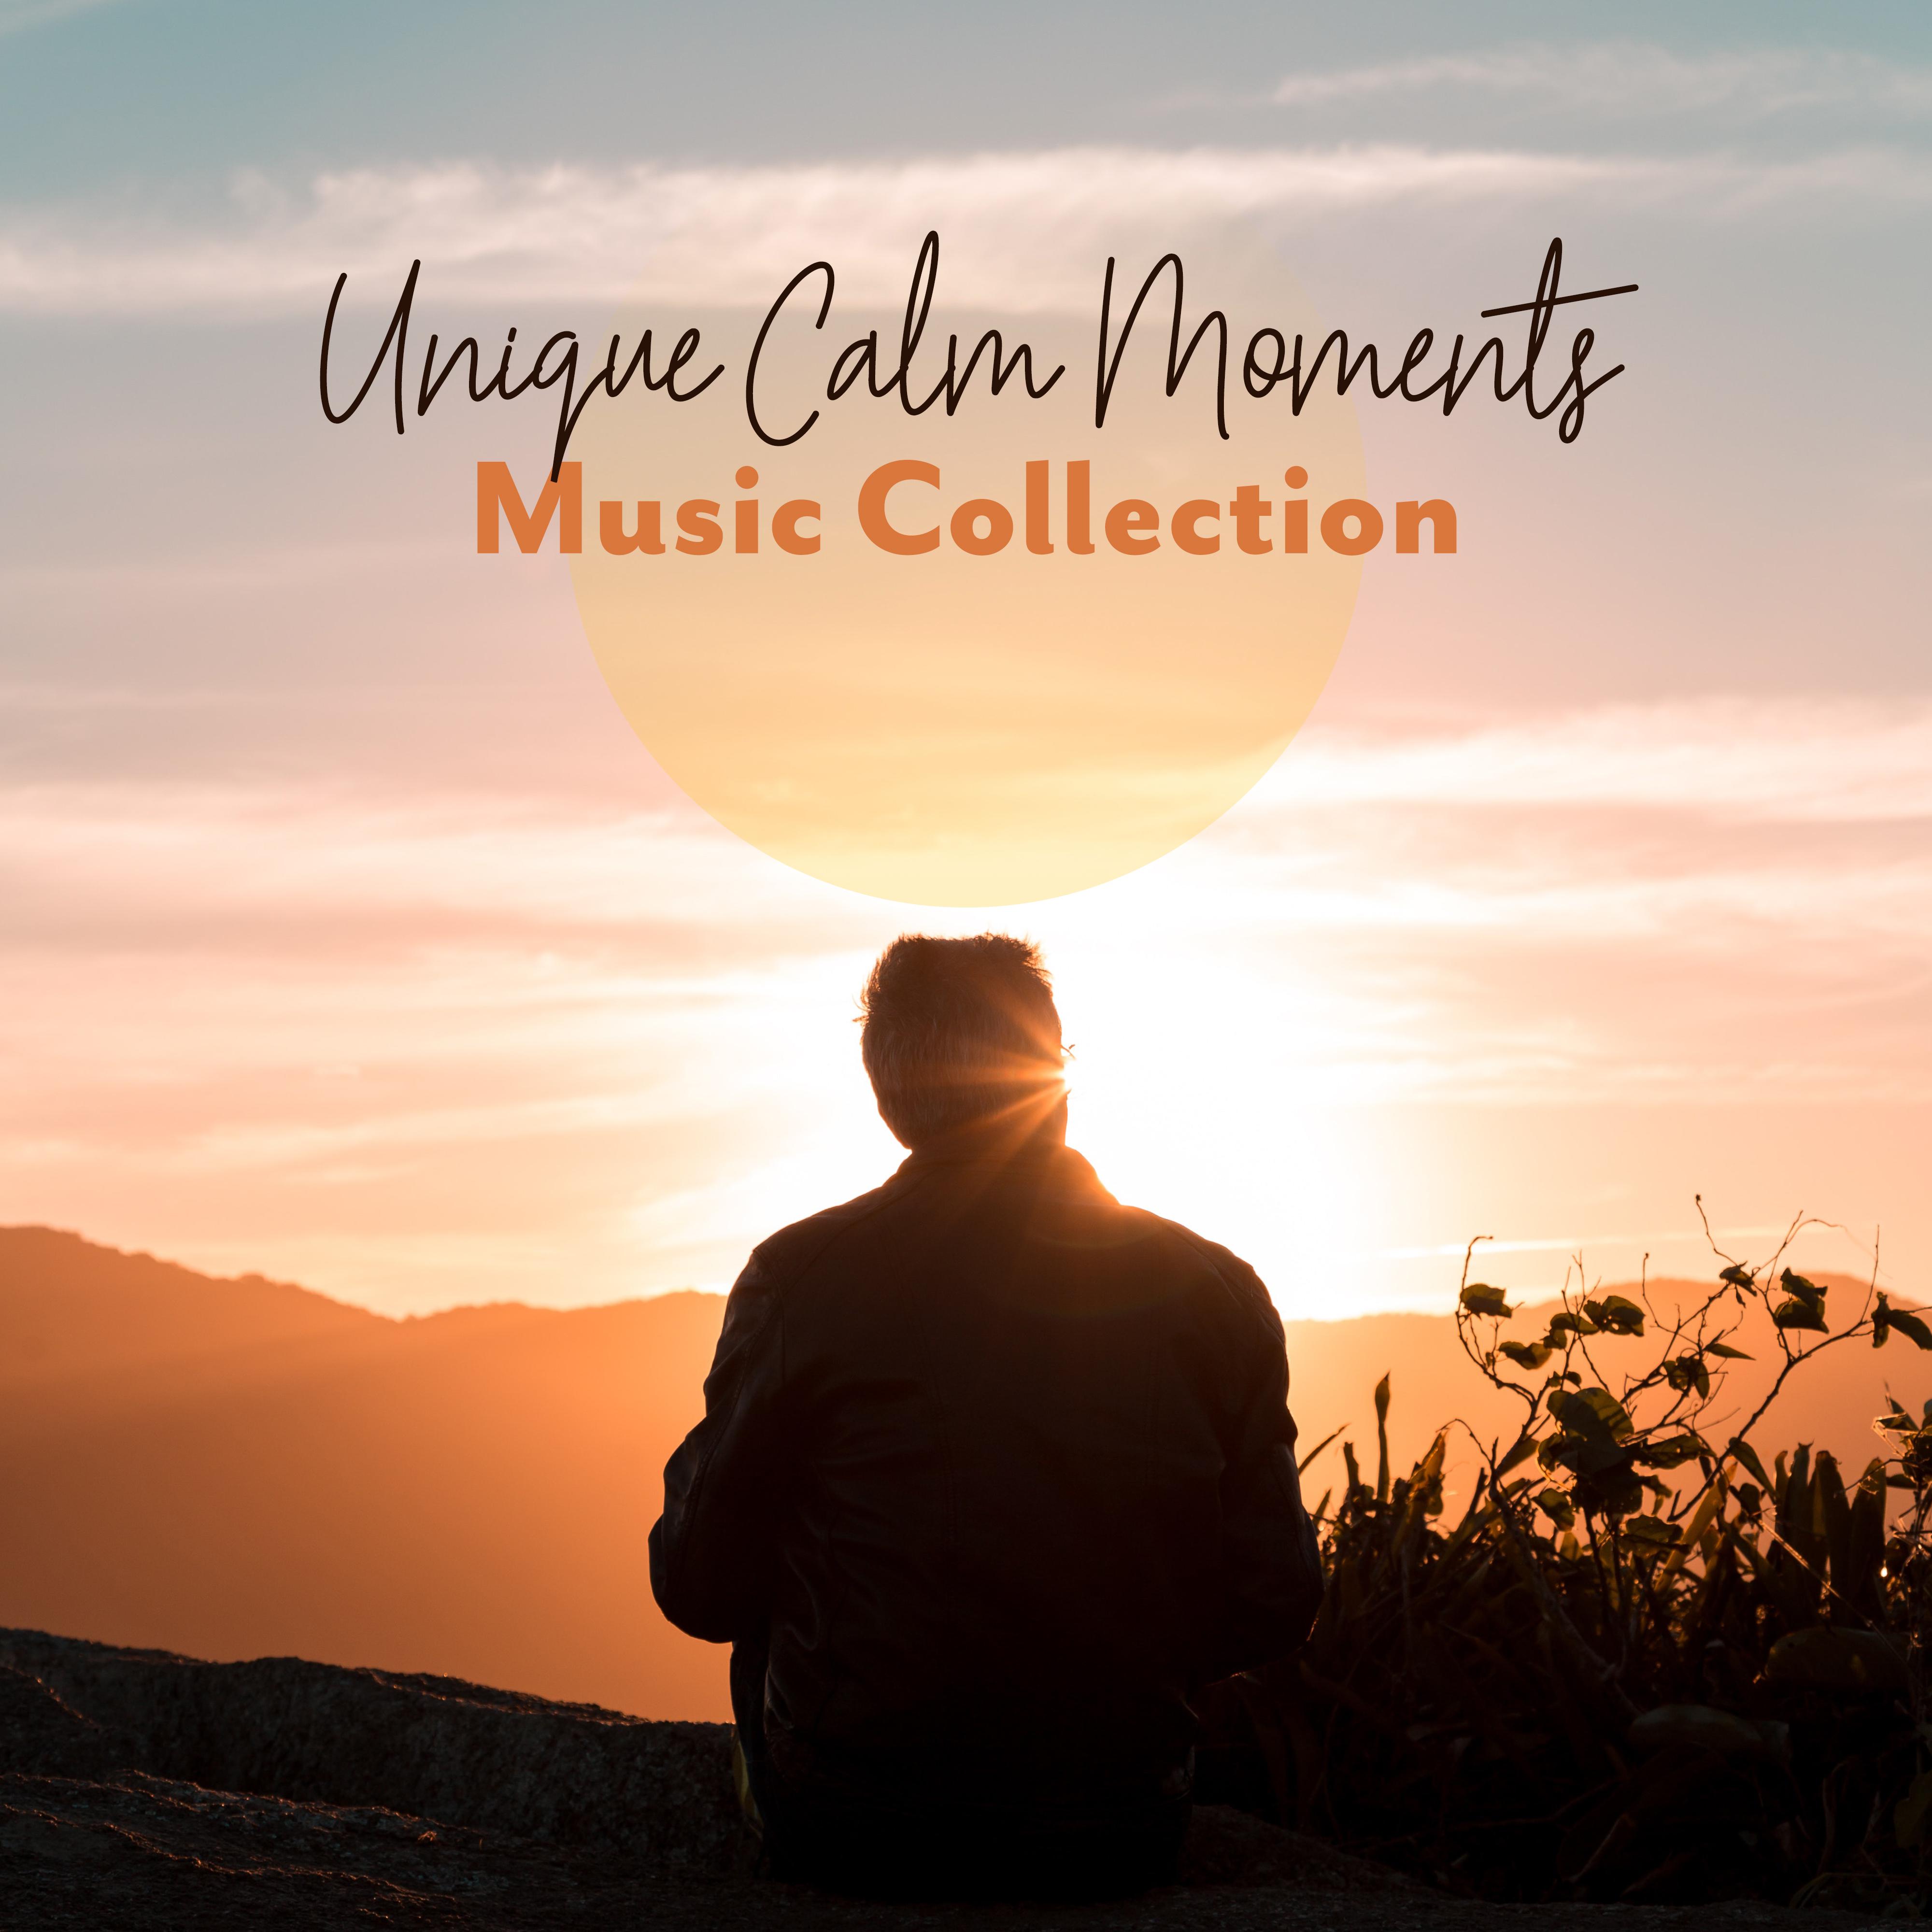 Unique Calm Moments Music Collection: 2019 New Age Ambient & Instrumental Music for Total Relax, Rest Your Vital Energy, Calm Down, Stress Relief, Sounds of Nature, Melodies Played on Piano, Guitar, Sax